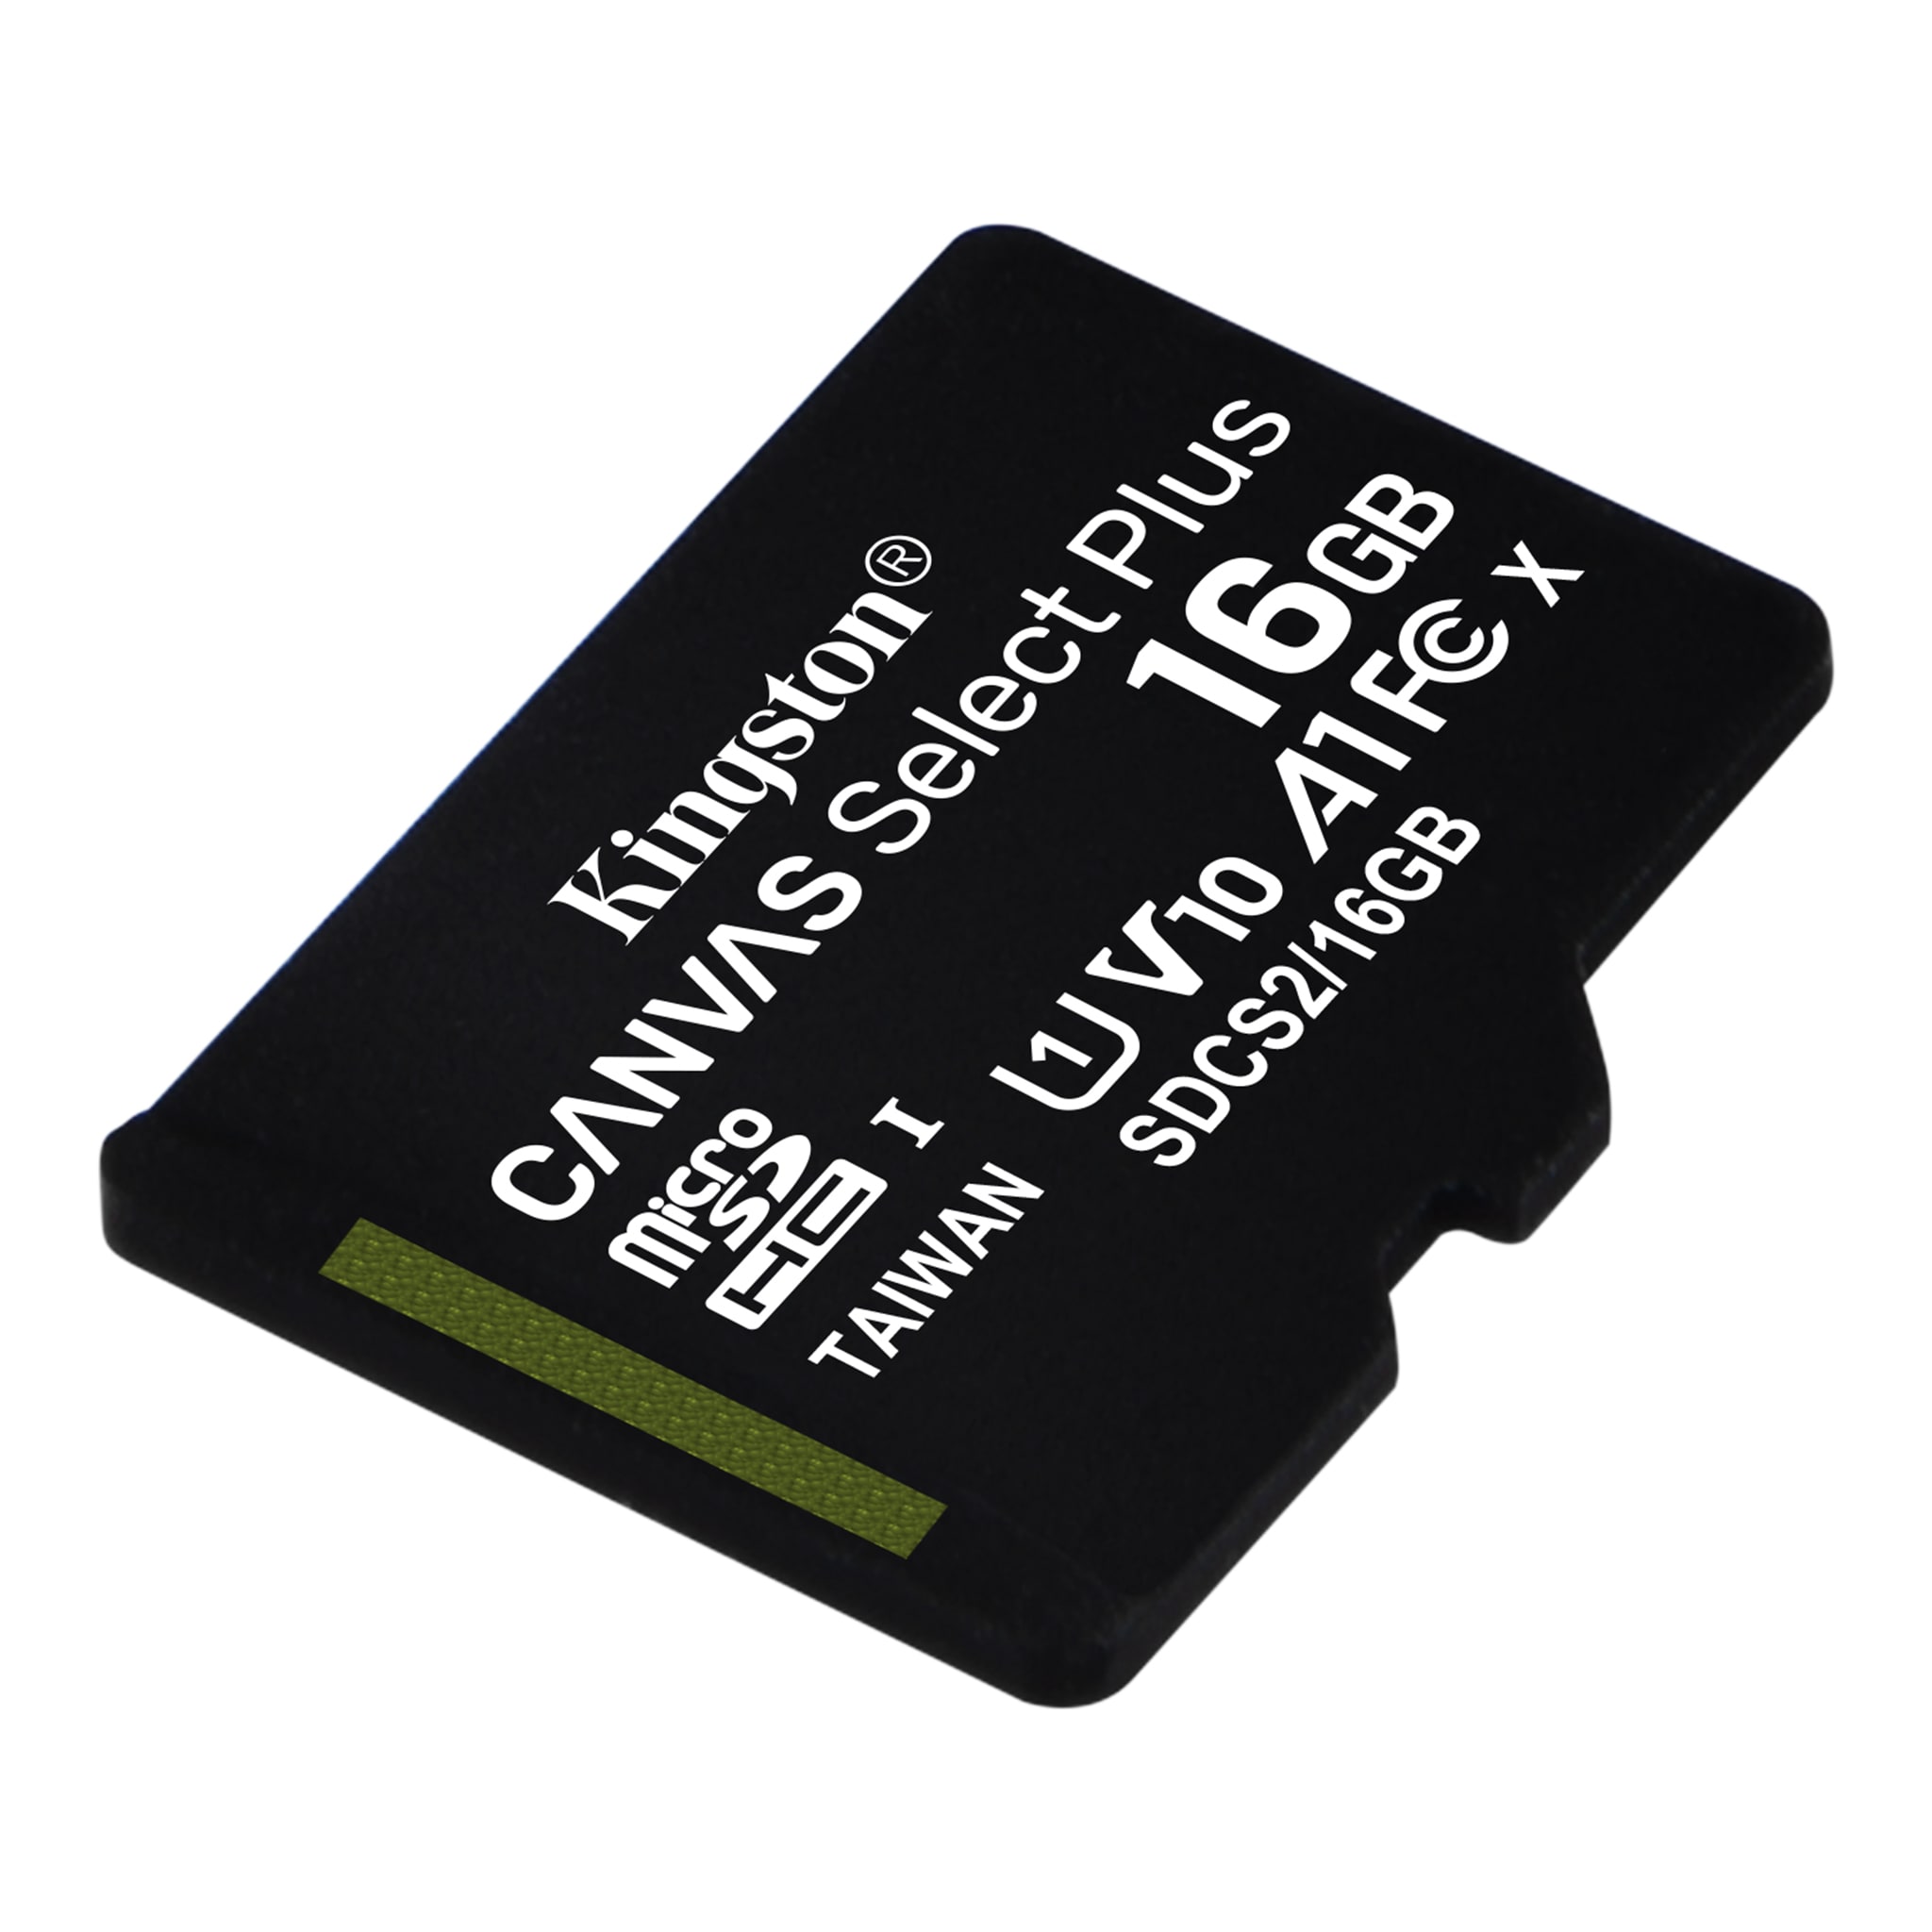 100MBs Works with Kingston Kingston 64GB Sony C6603 MicroSDXC Canvas Select Plus Card Verified by SanFlash.